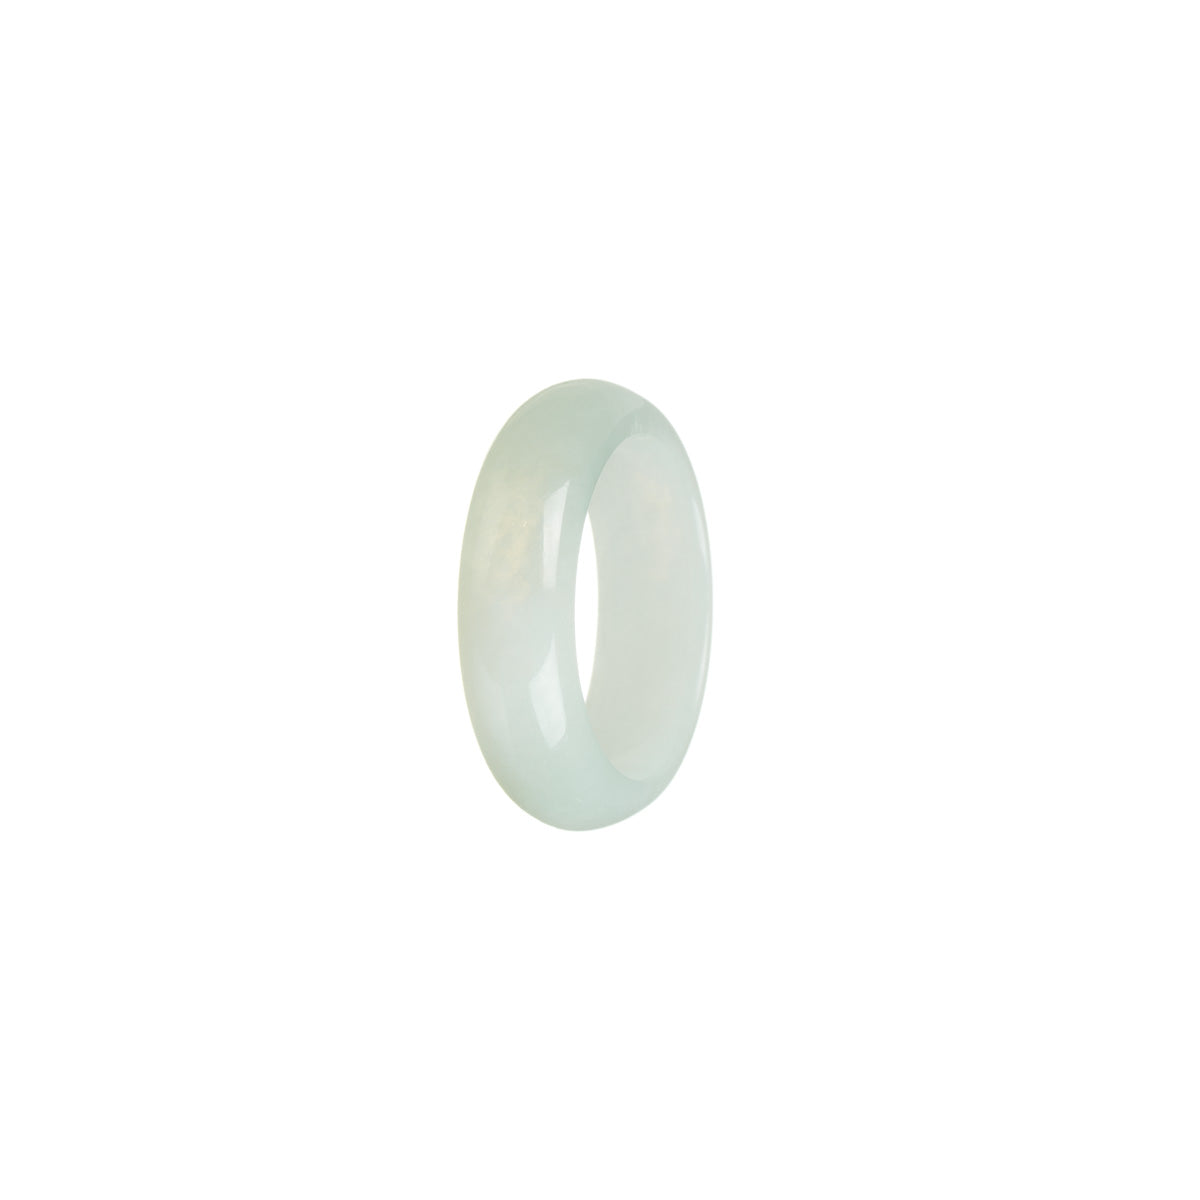 Authentic Pale Green Jade Ring - Size S 1/2